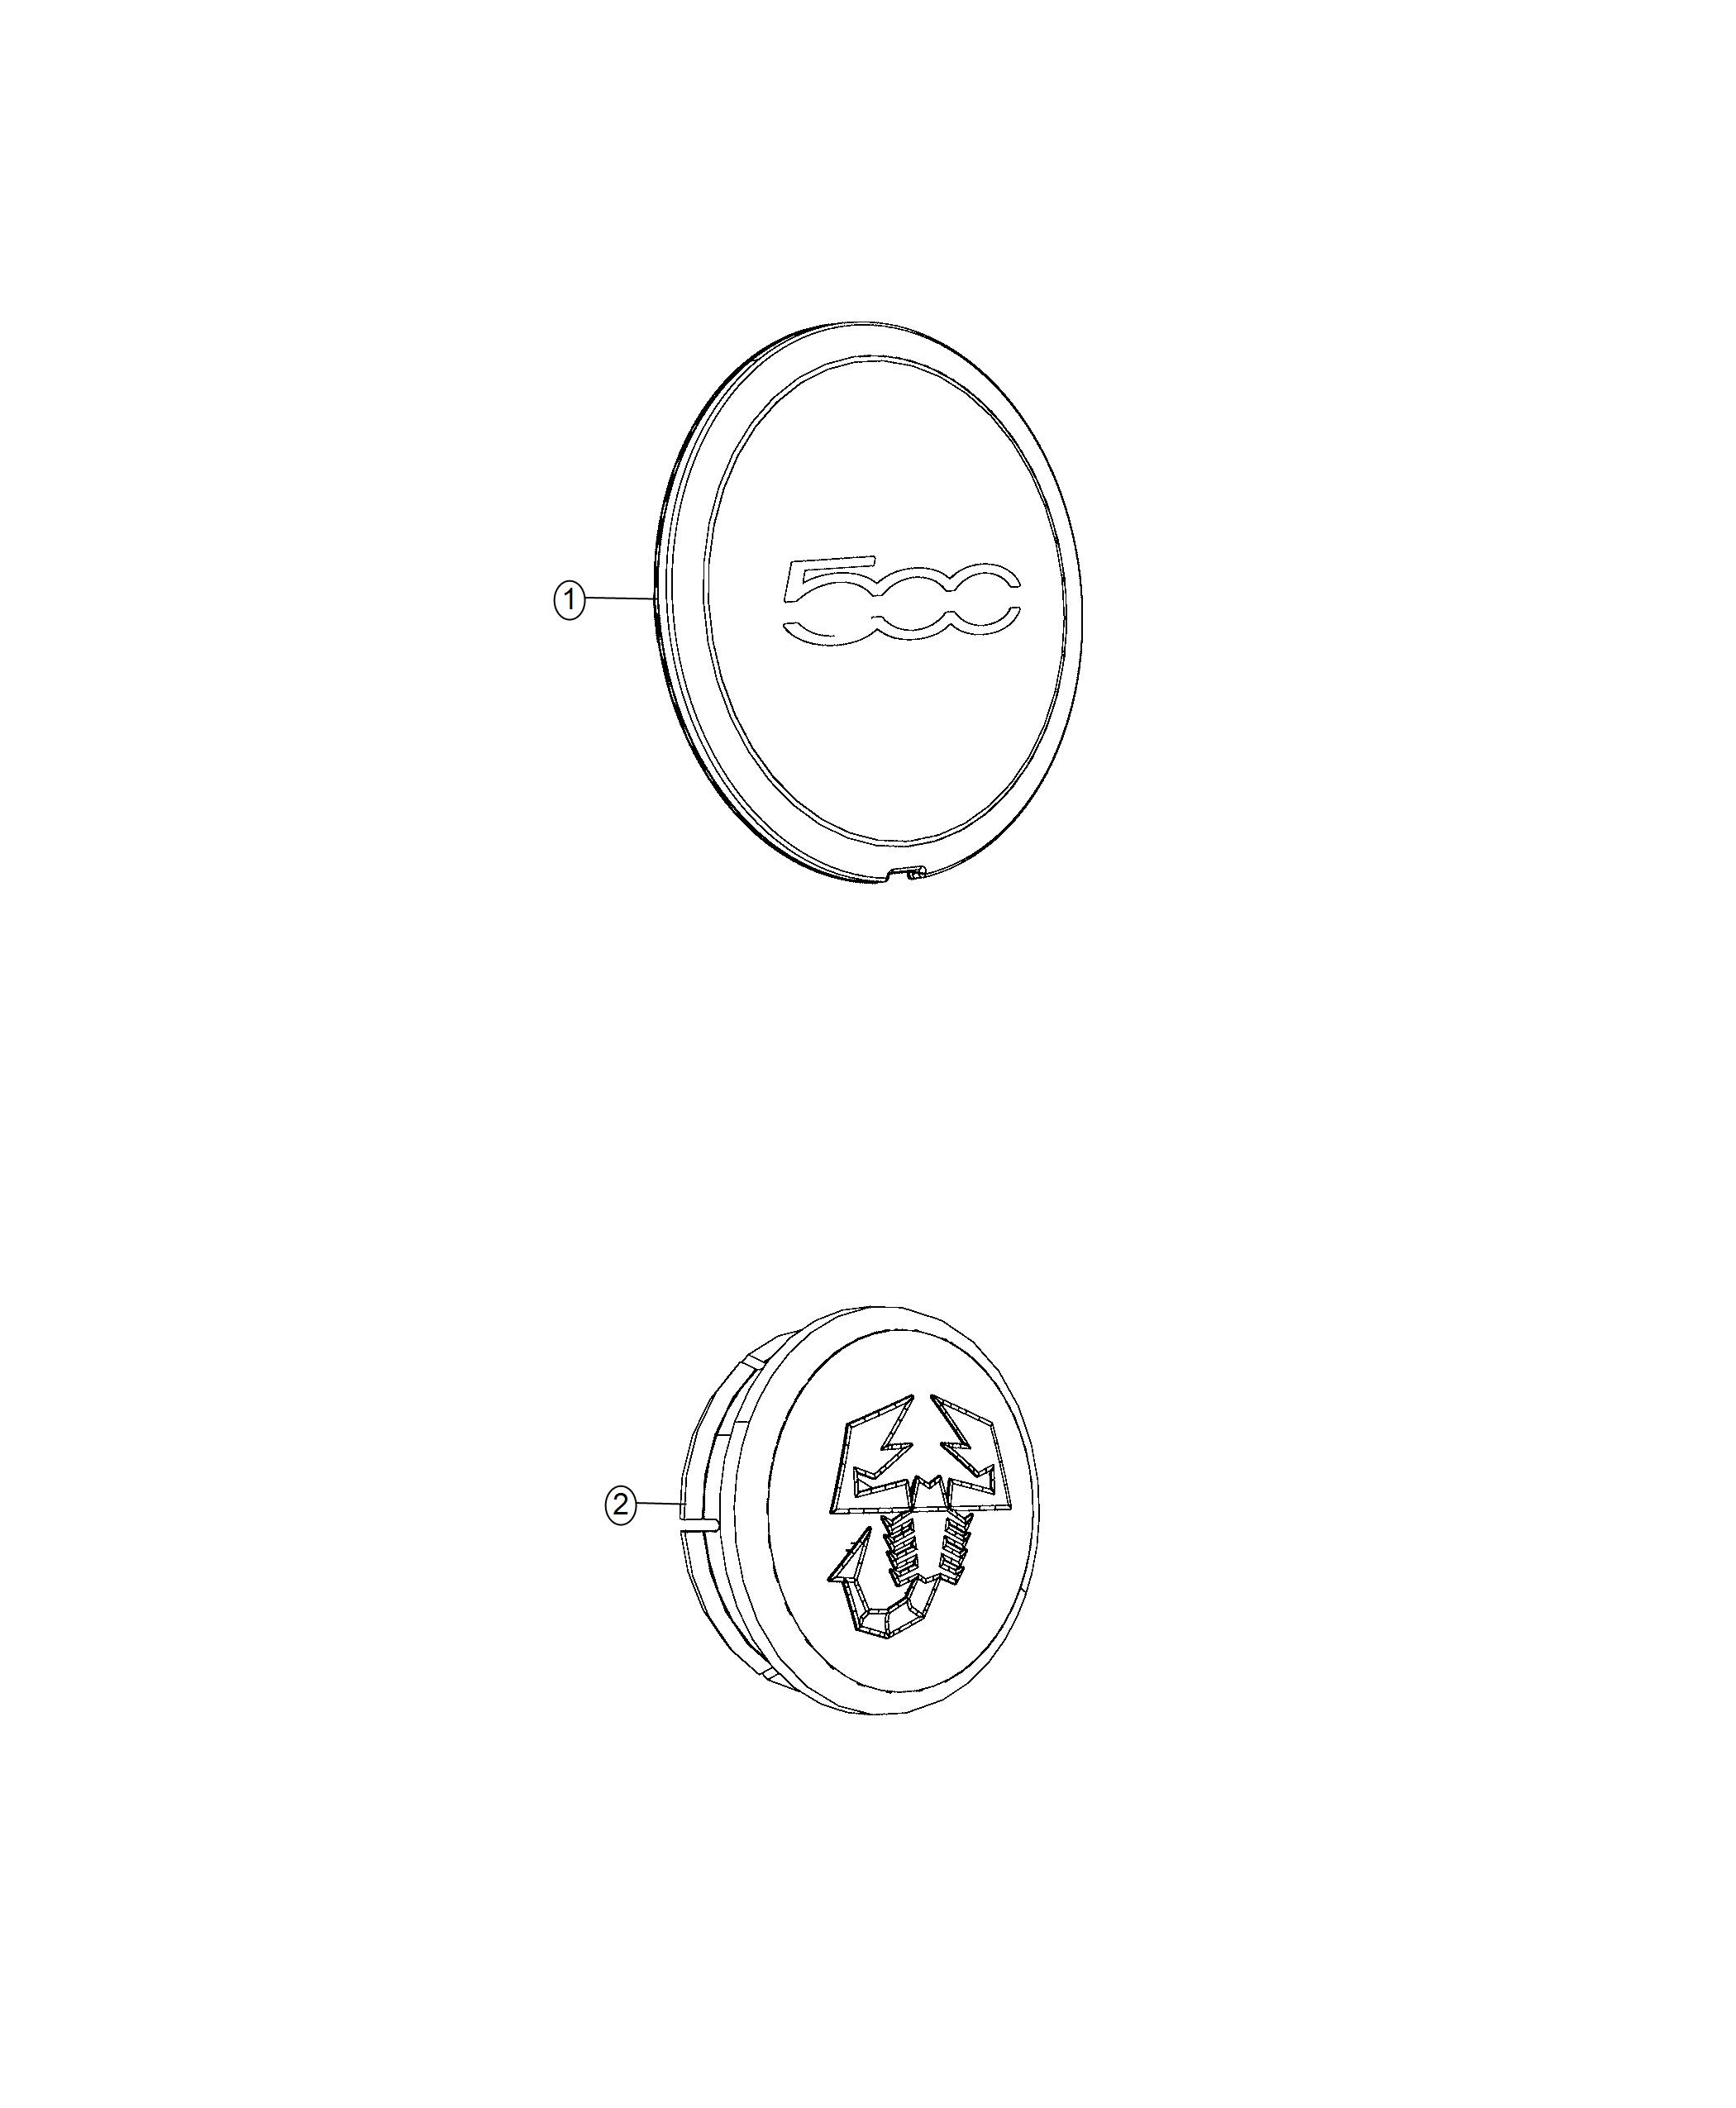 Wheel Covers And Center Caps. Diagram